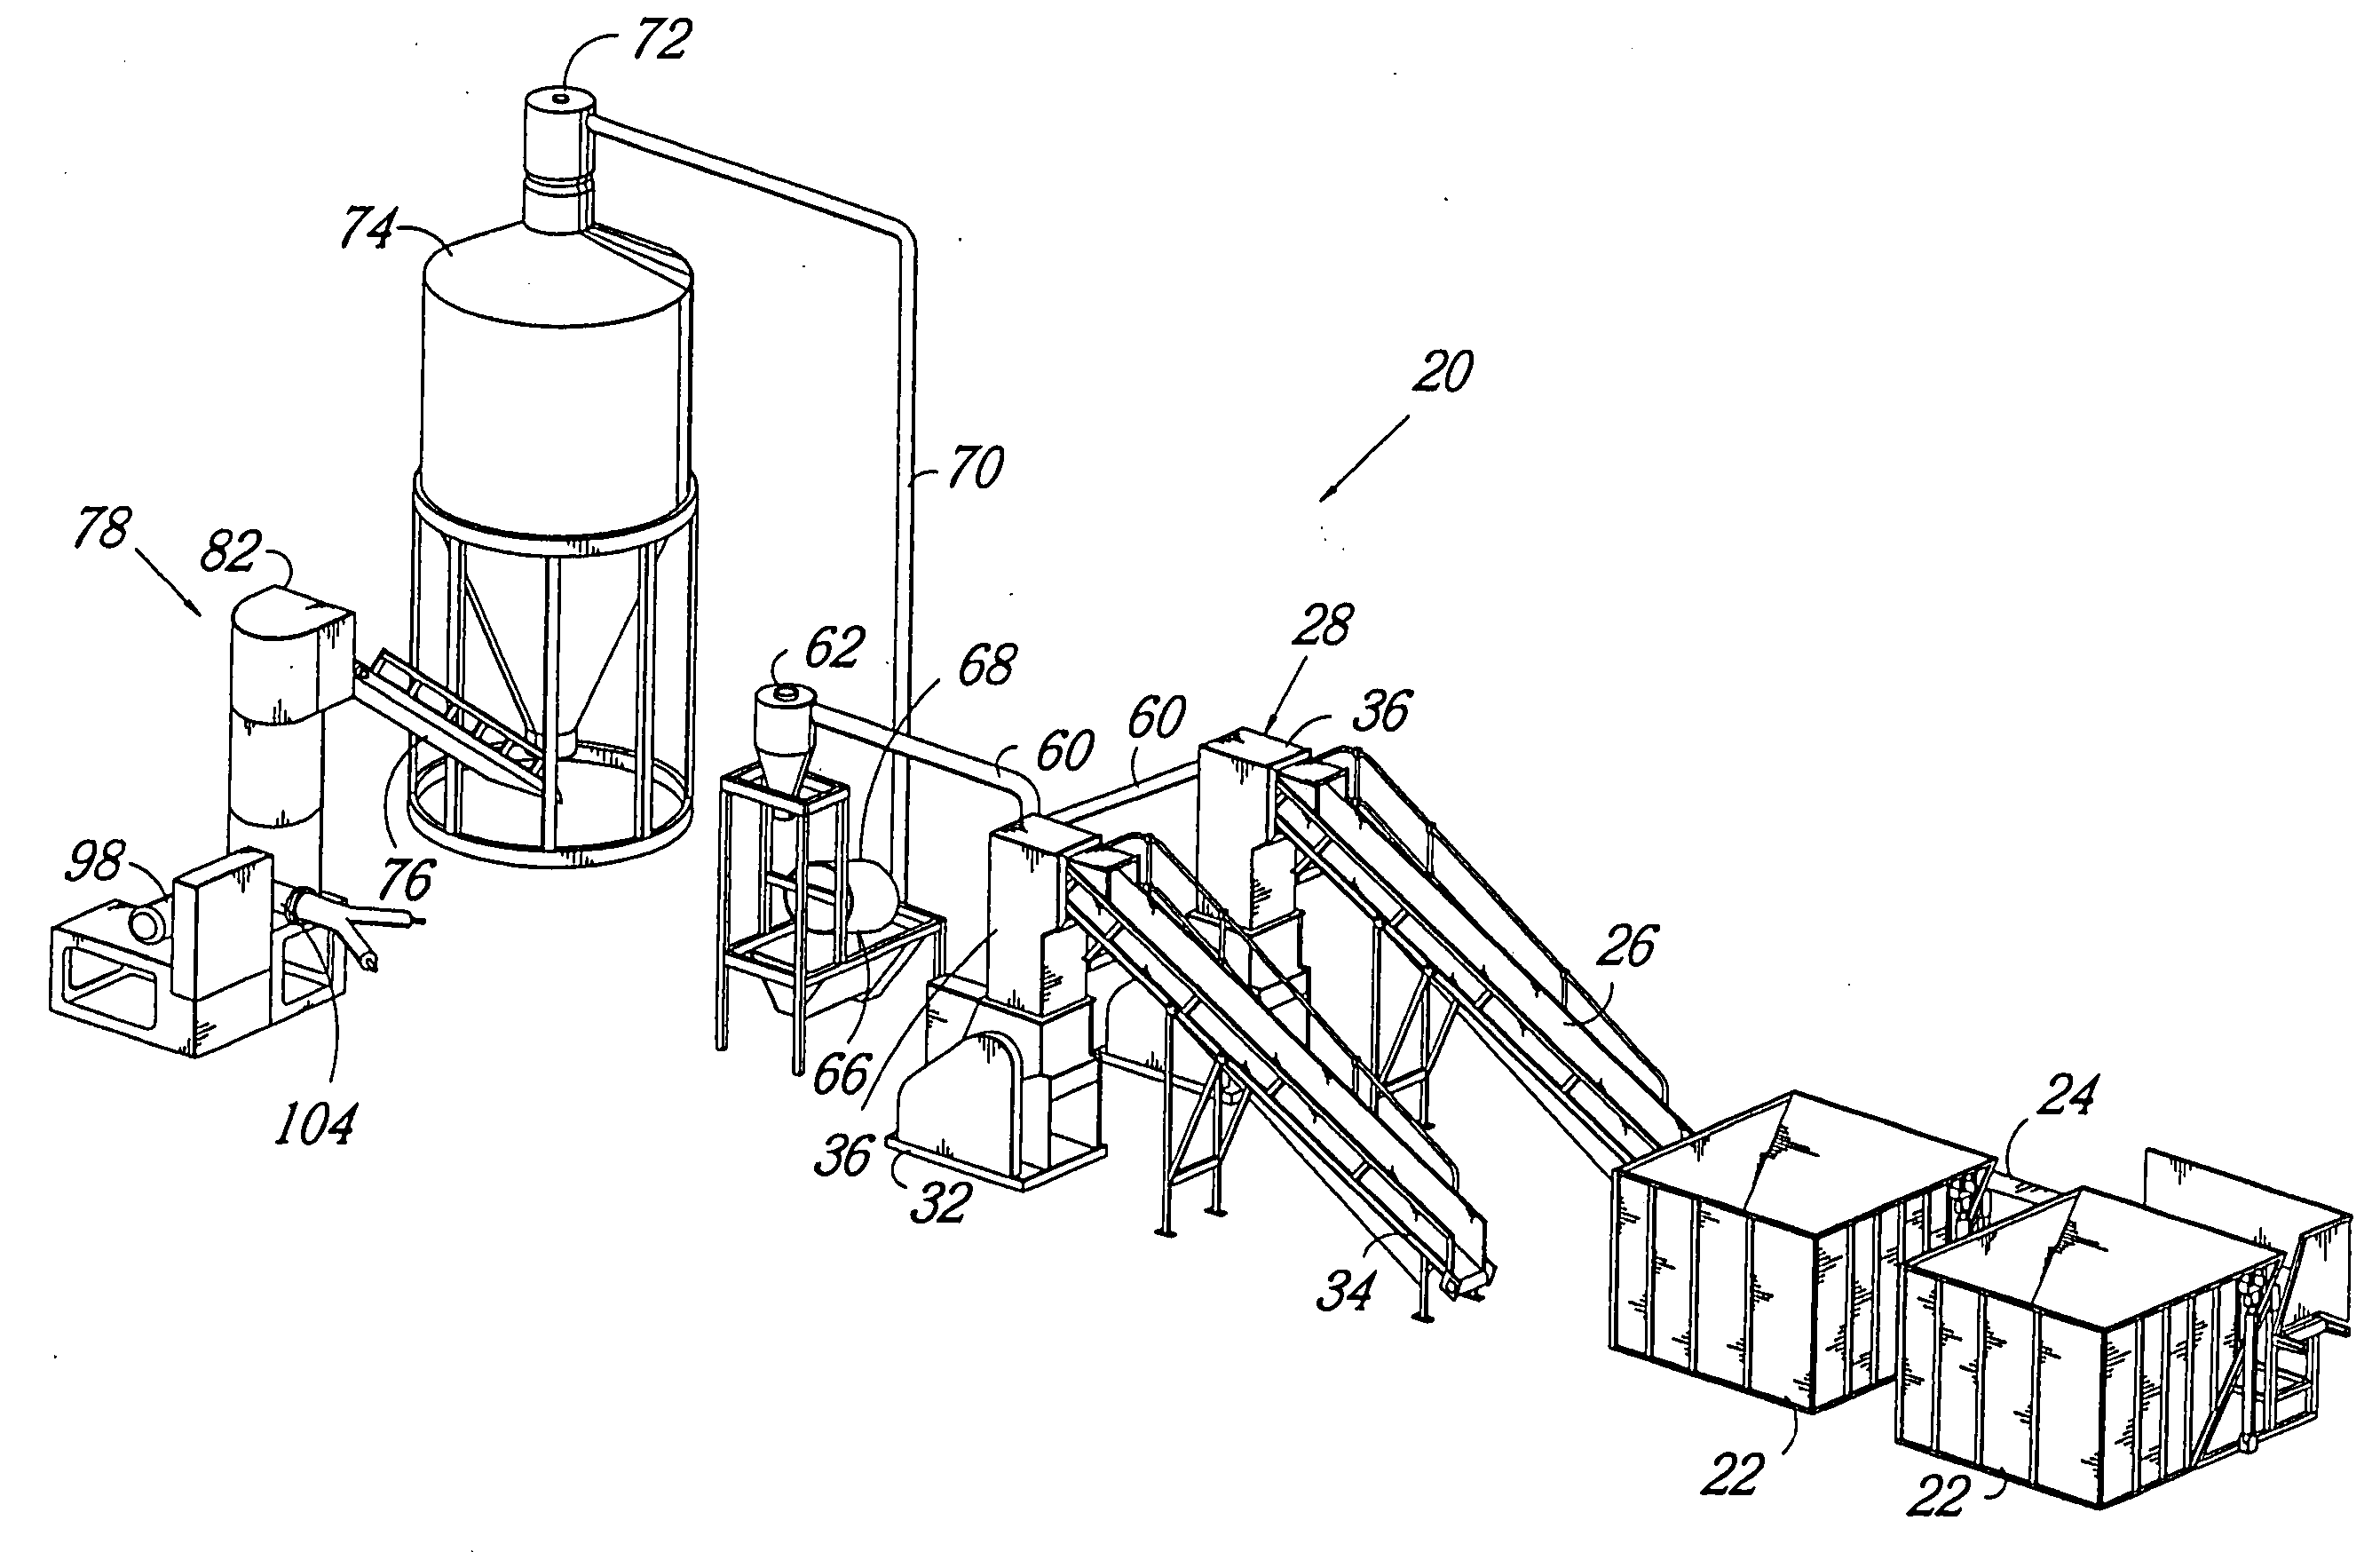 Plastic recycling system and process